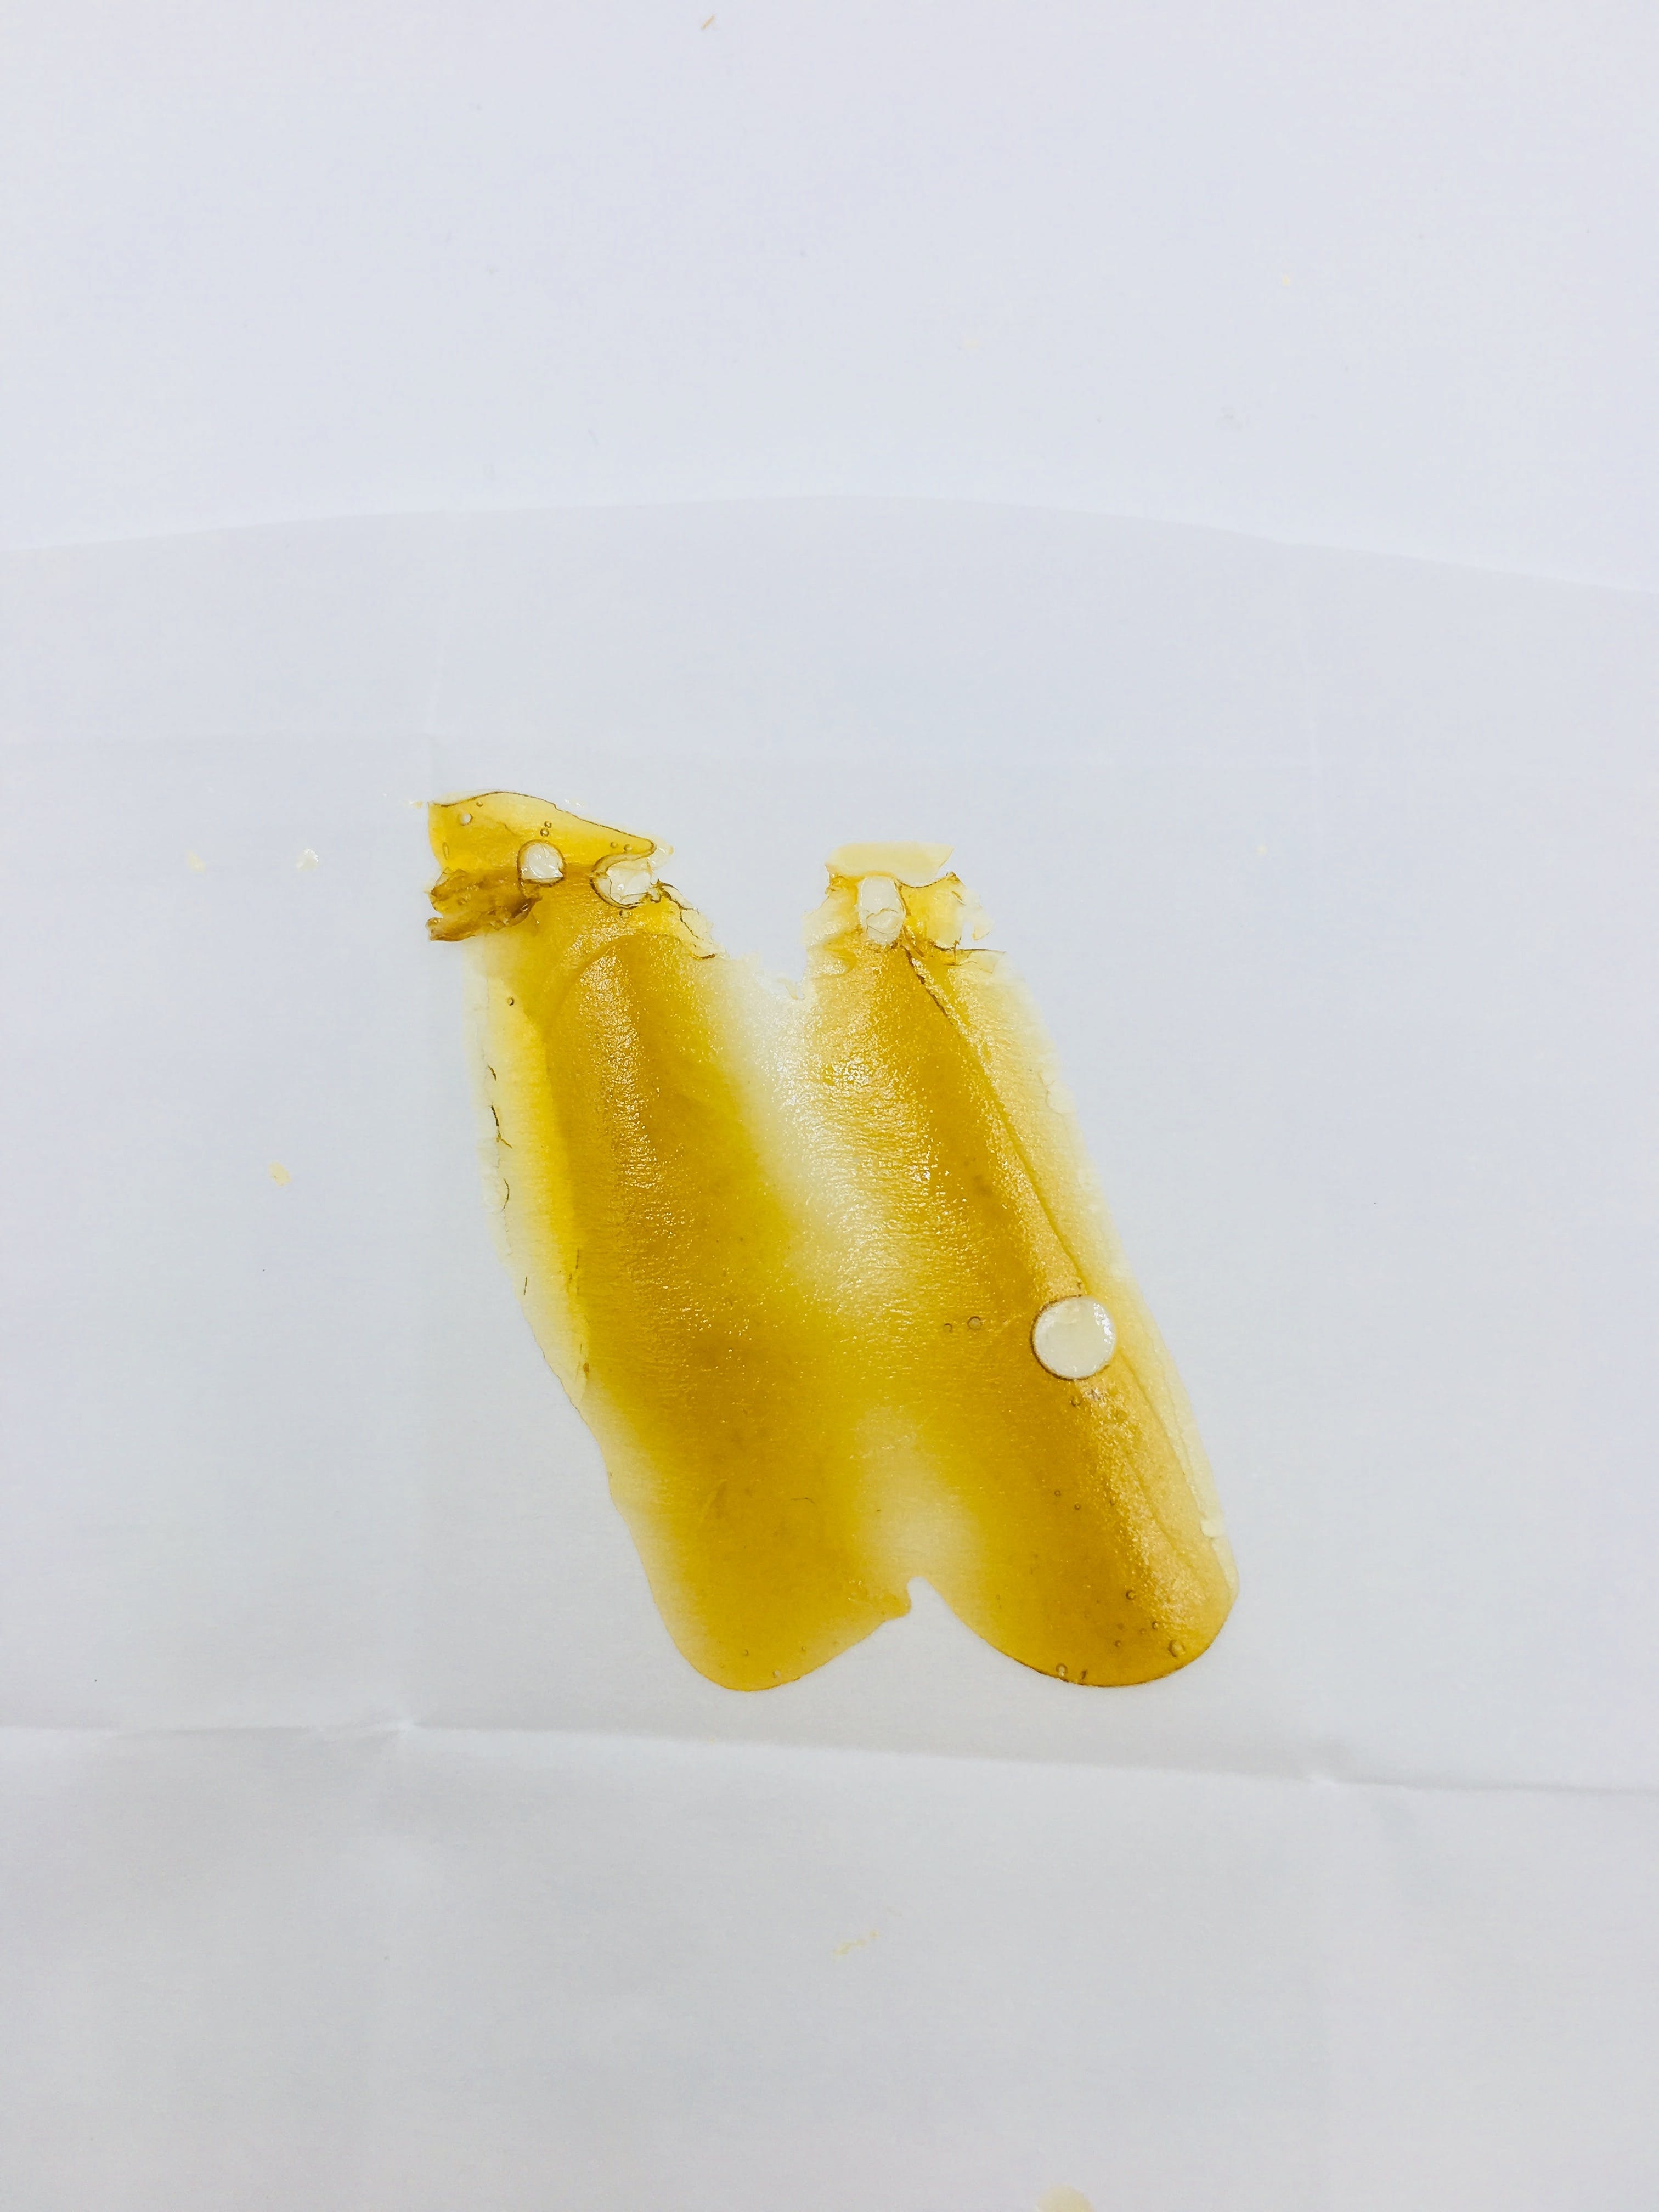 wax-travelling-high-concentrates-ben-b